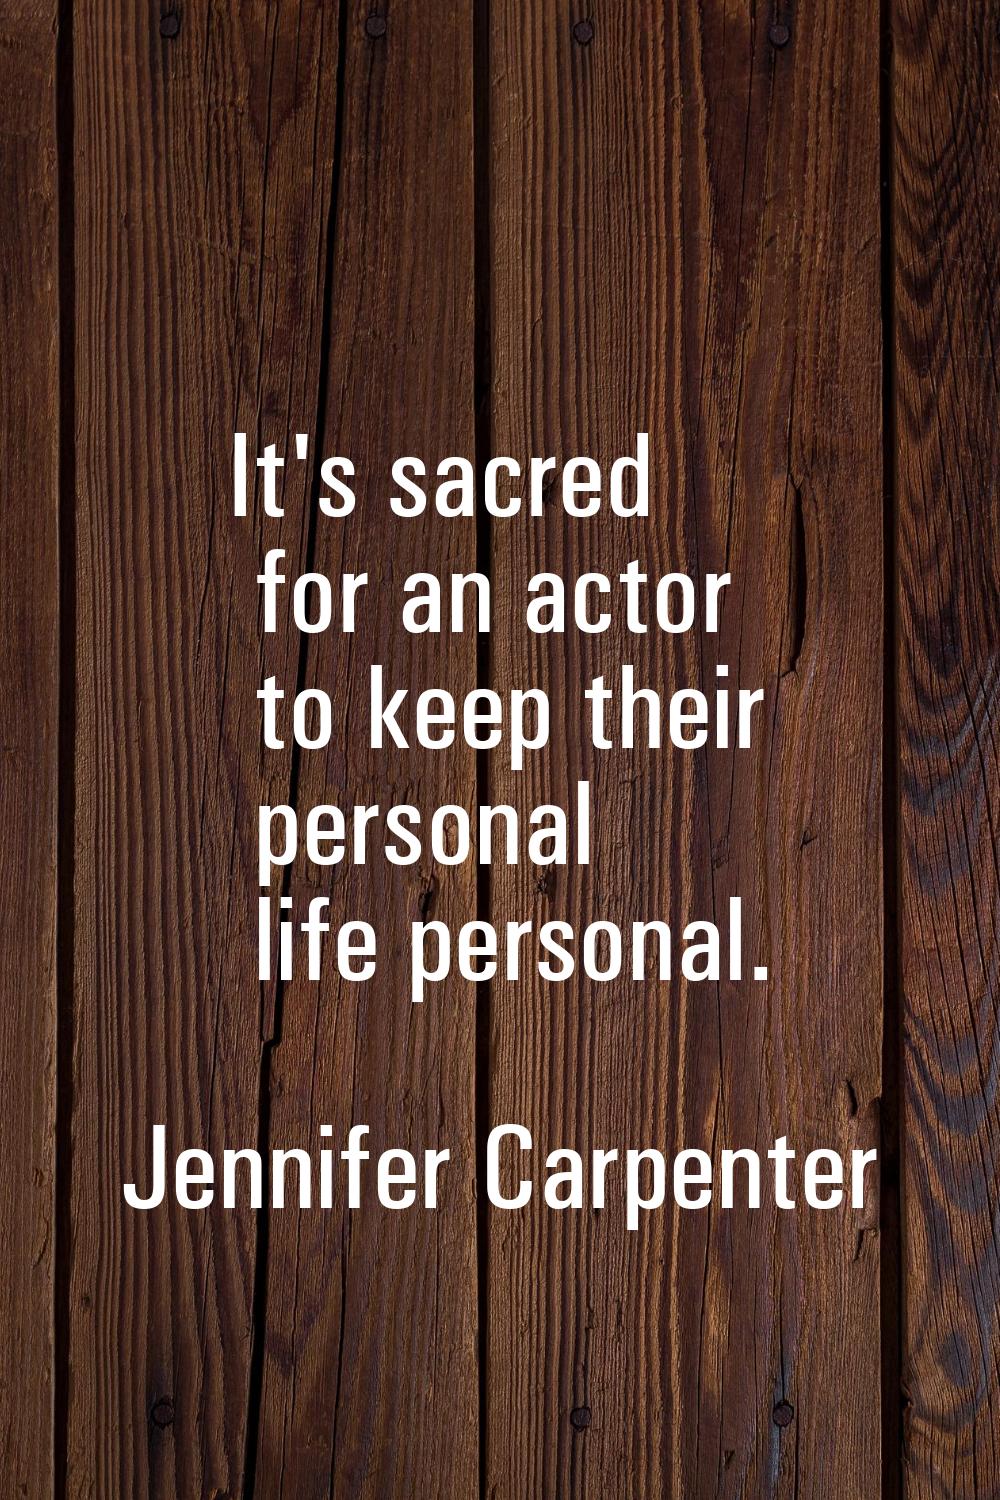 It's sacred for an actor to keep their personal life personal.